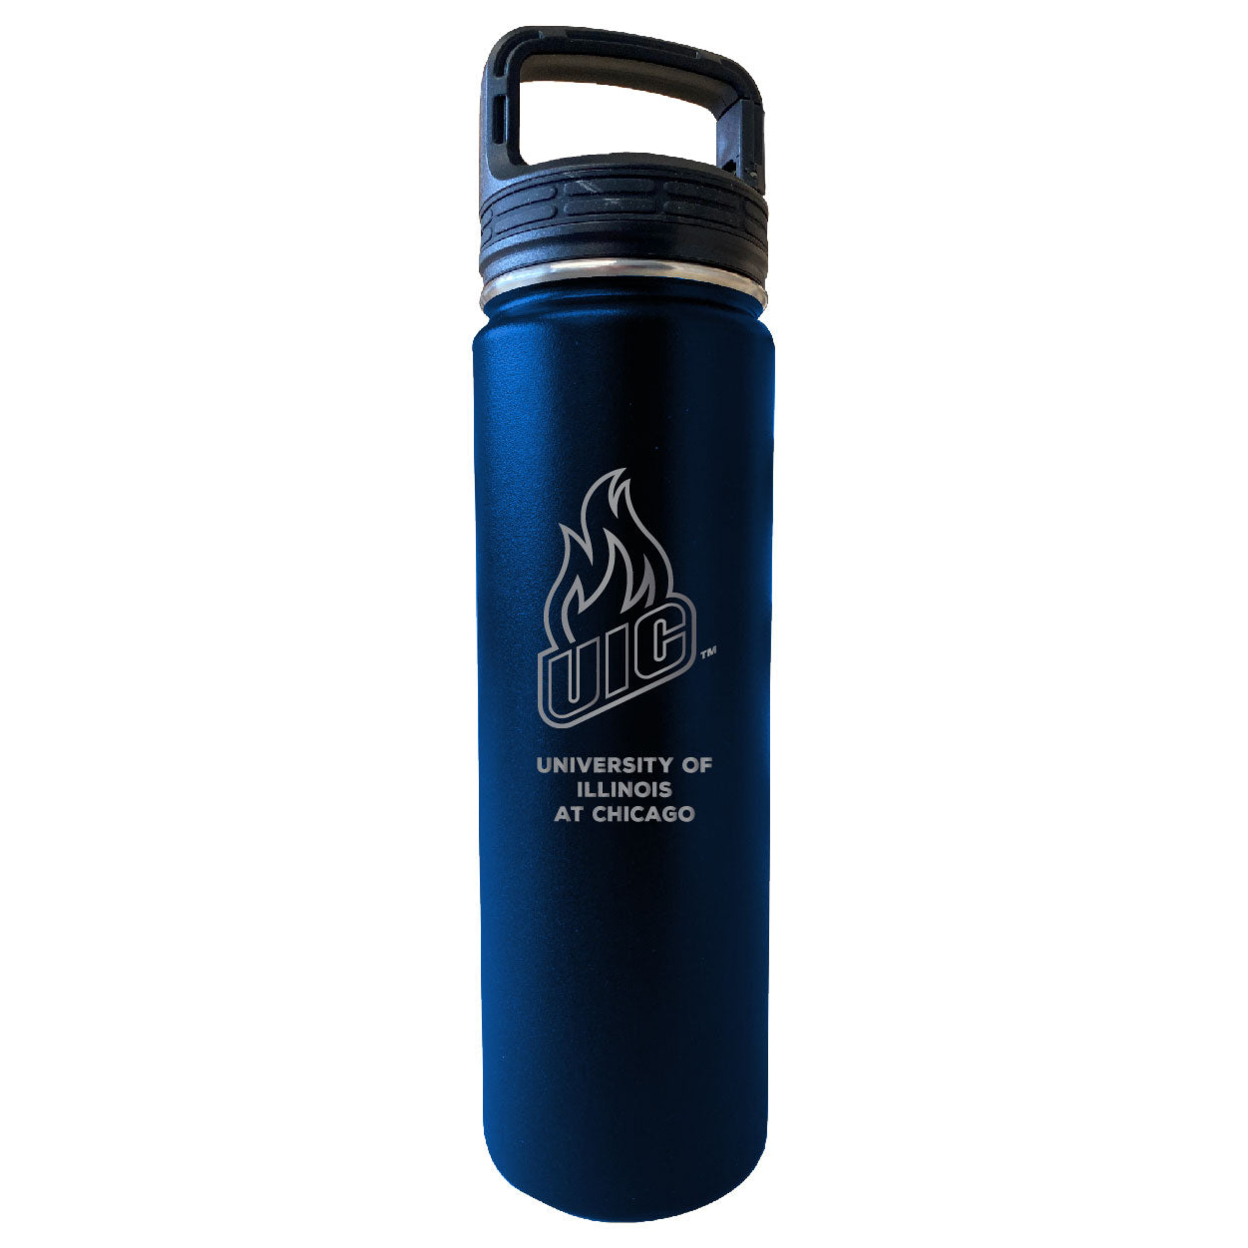 University Of Illinois At Chicago 32oz Stainless Steel Tumbler - Choose Your Color - Navy